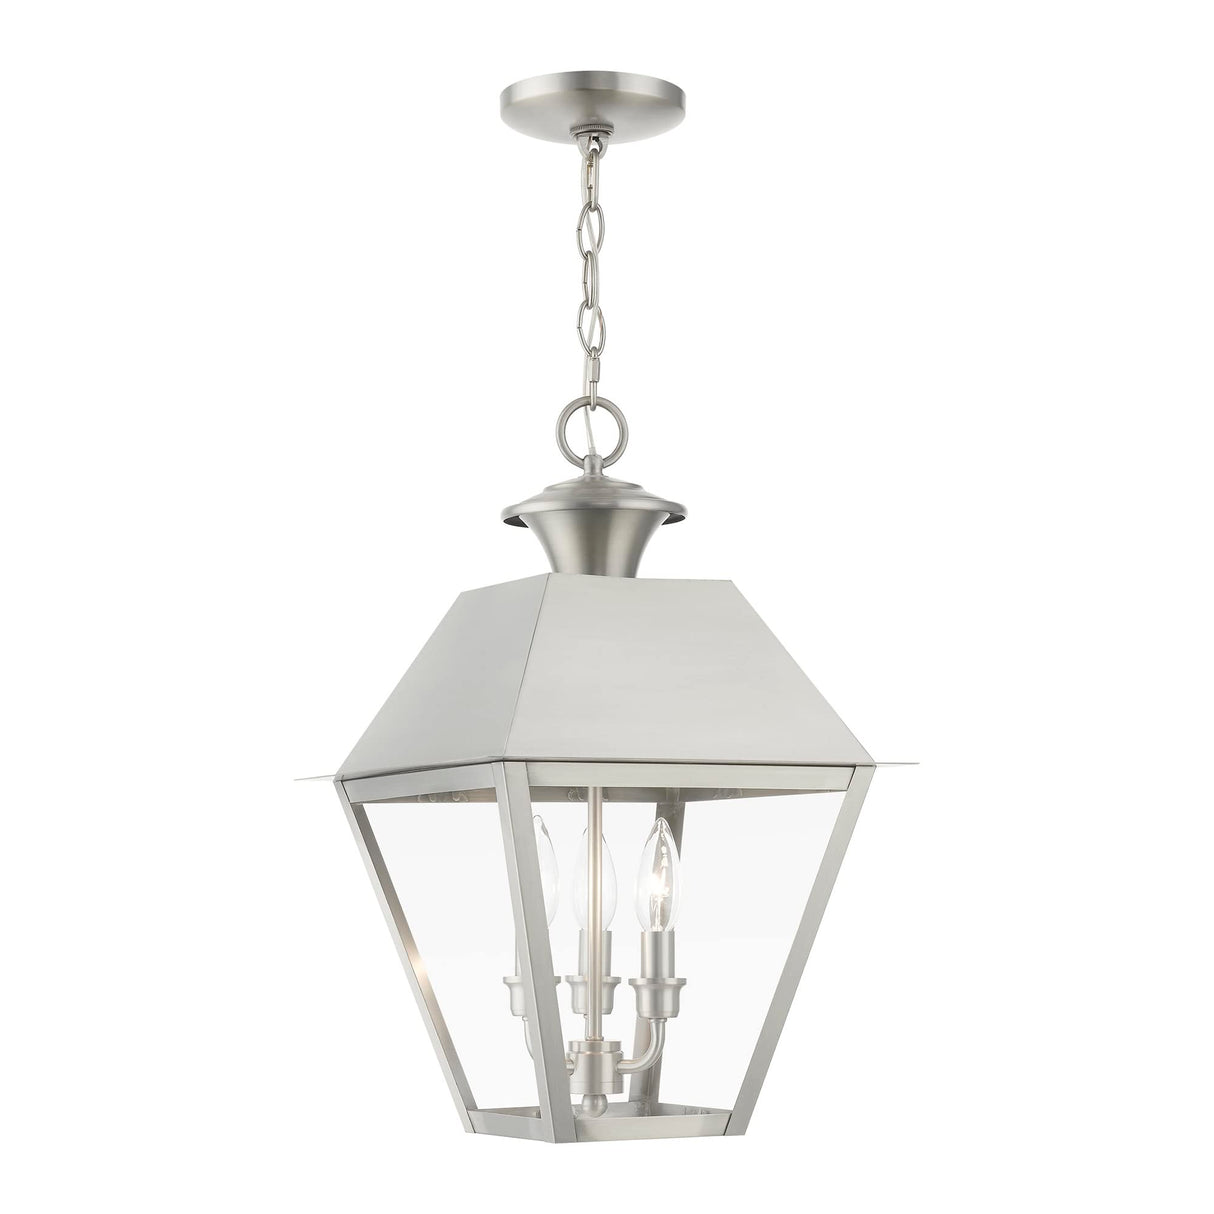 Wentworth 3 Light Outdoor Pendant in Brushed Nickel (27220-91)